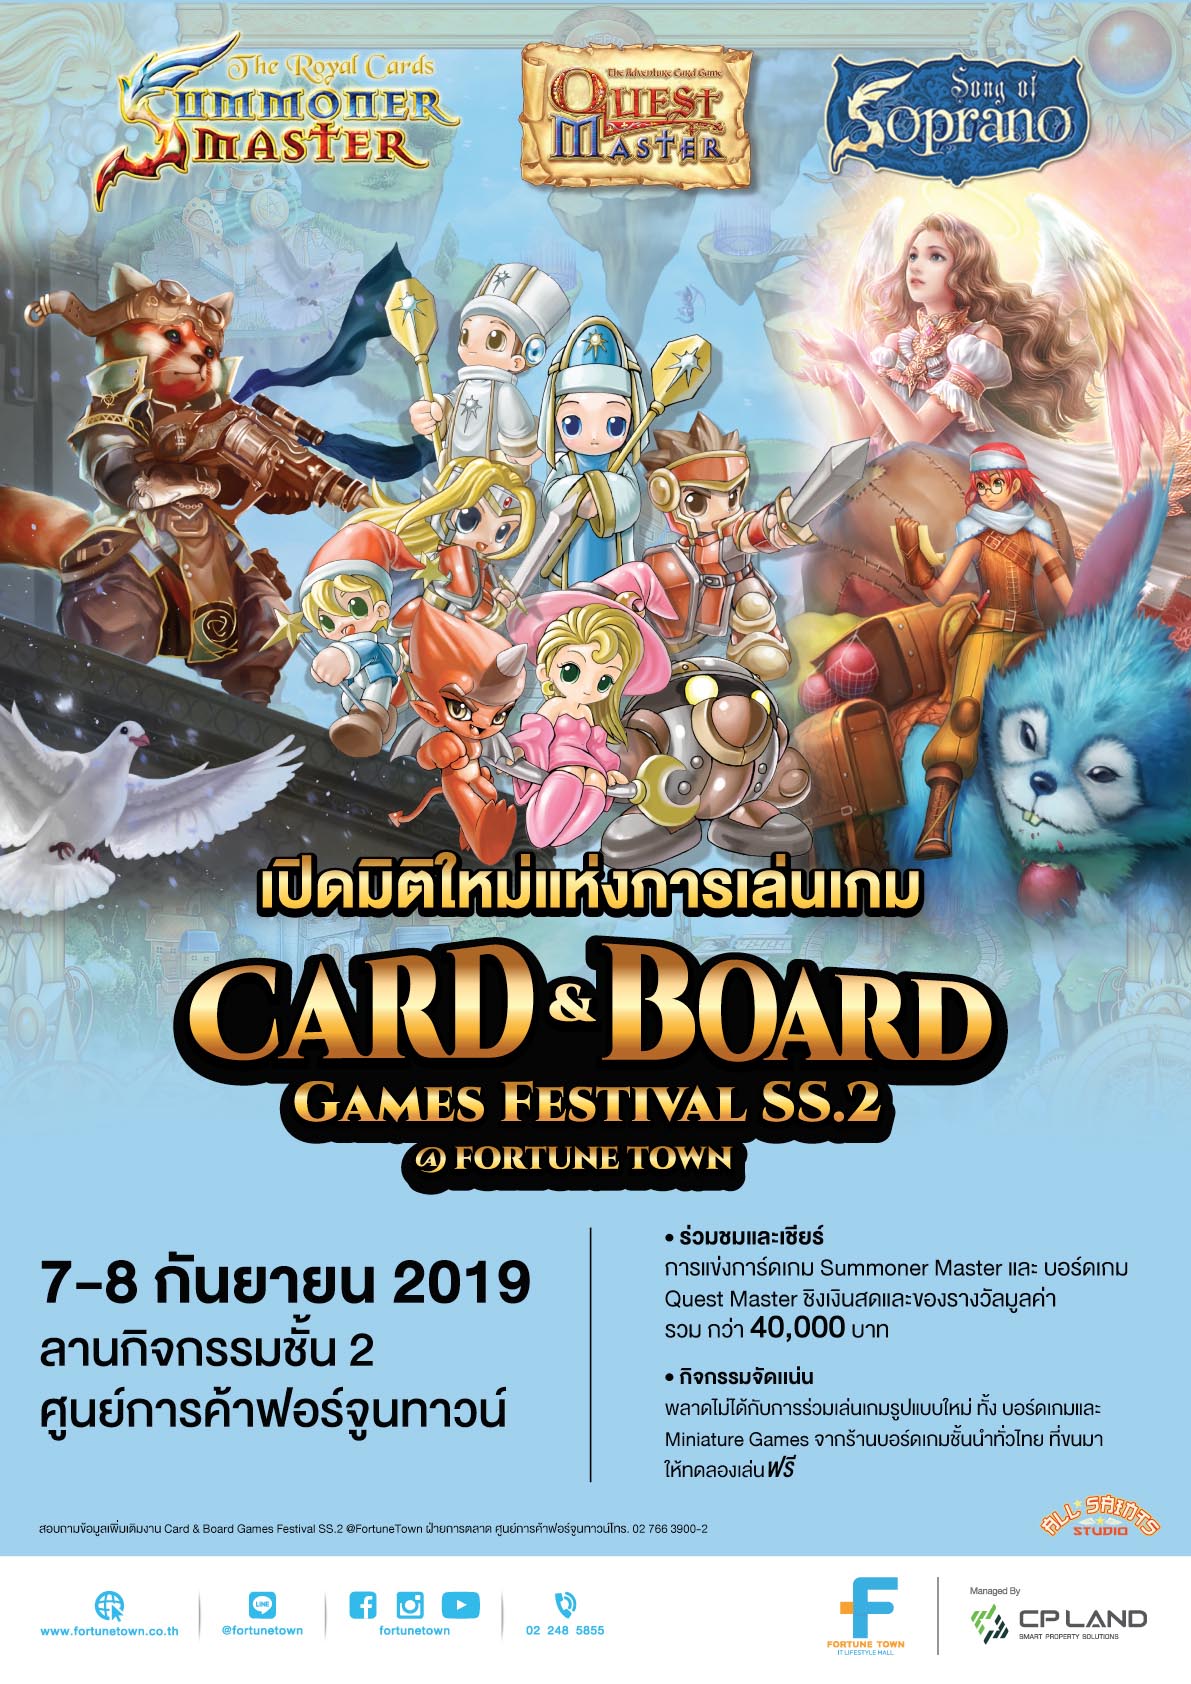 Card&Board Games Festival SS.2 @FortuneTown